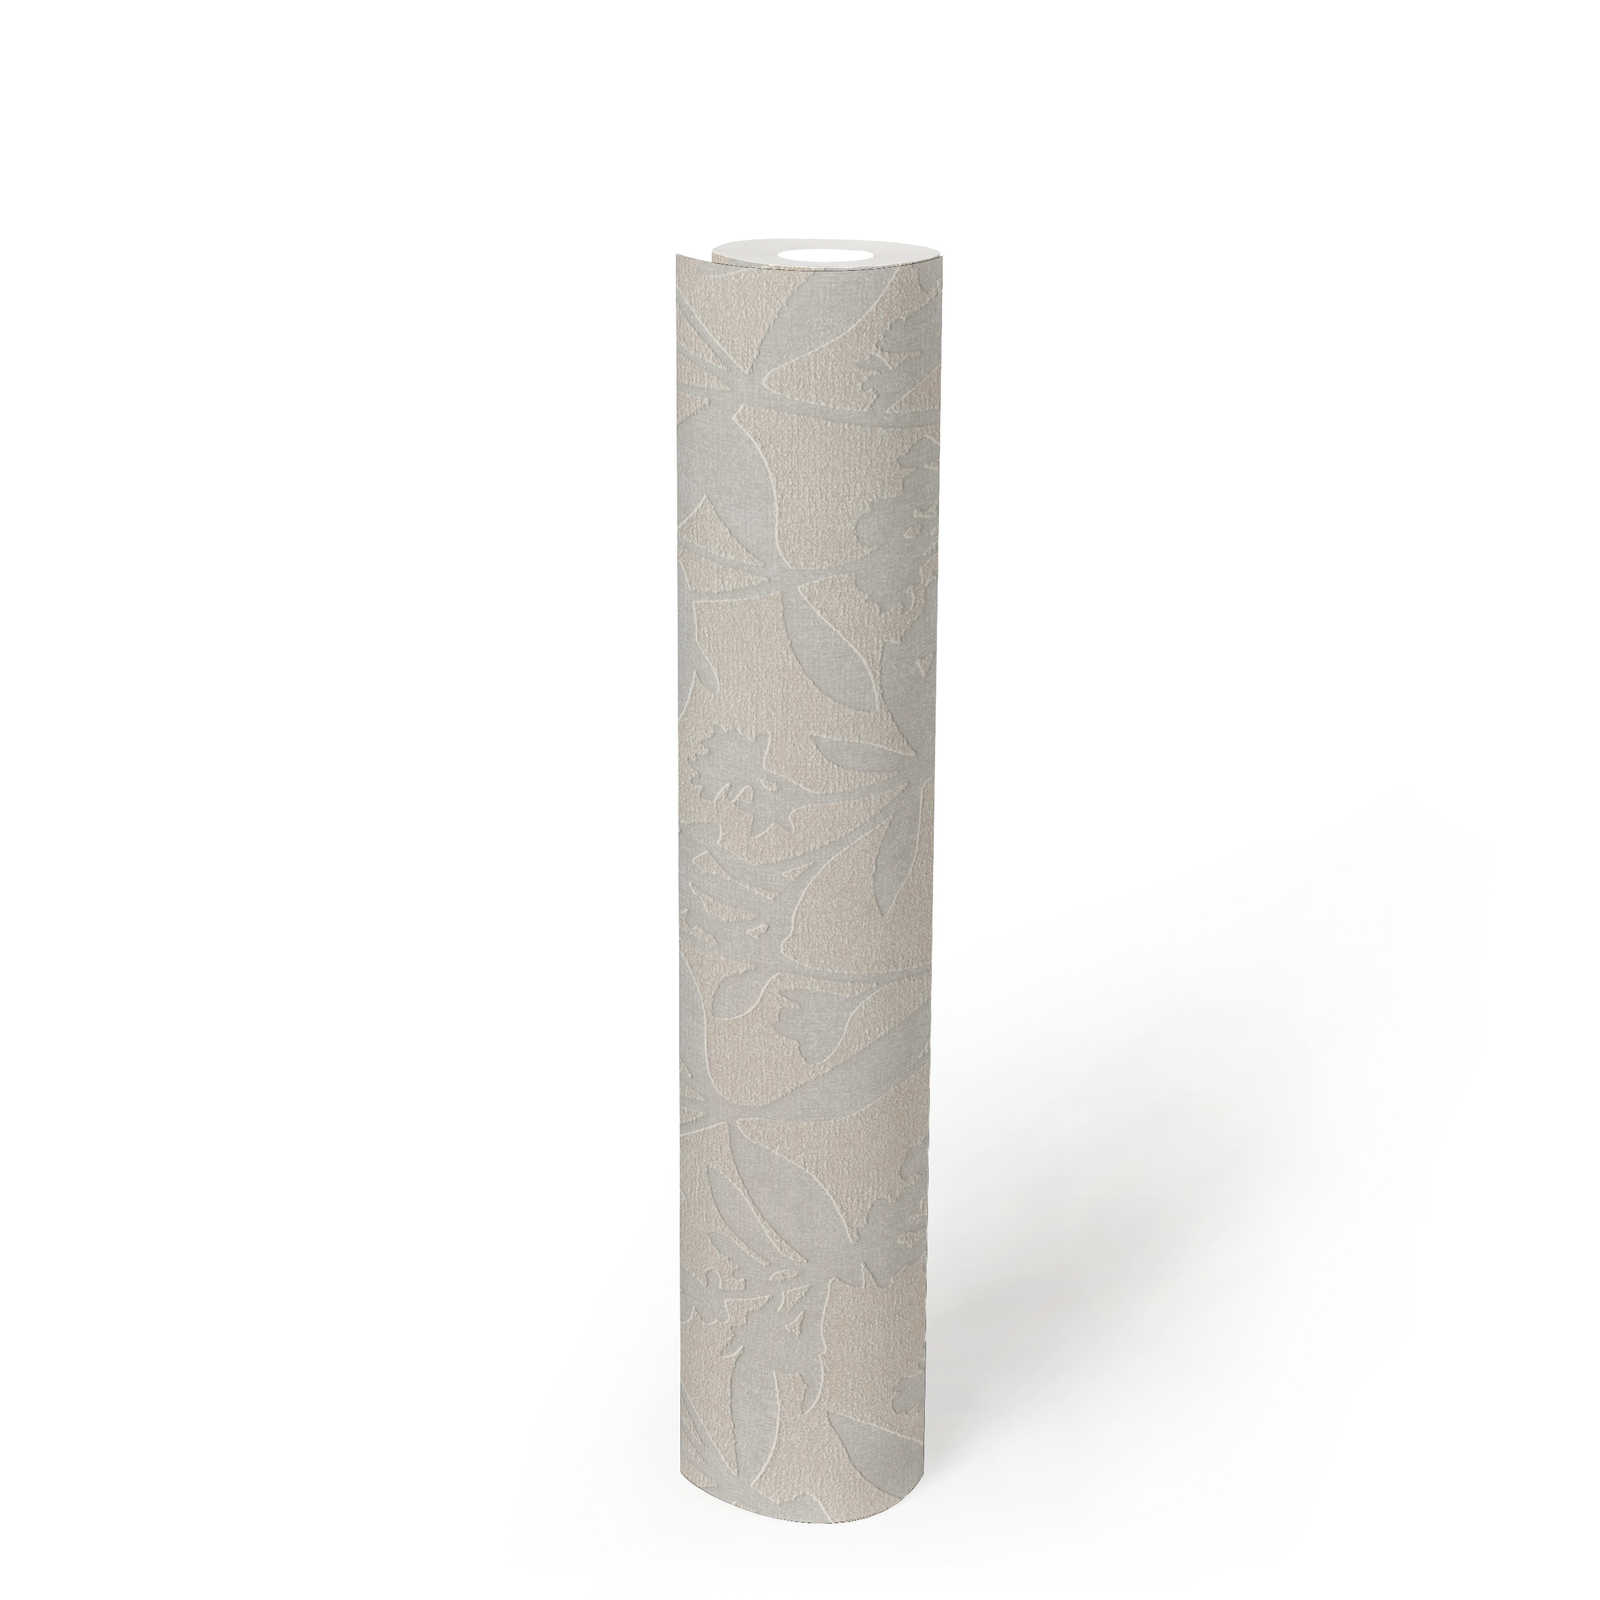             Floral non-woven wallpaper with flowers textured pattern - cream, white
        